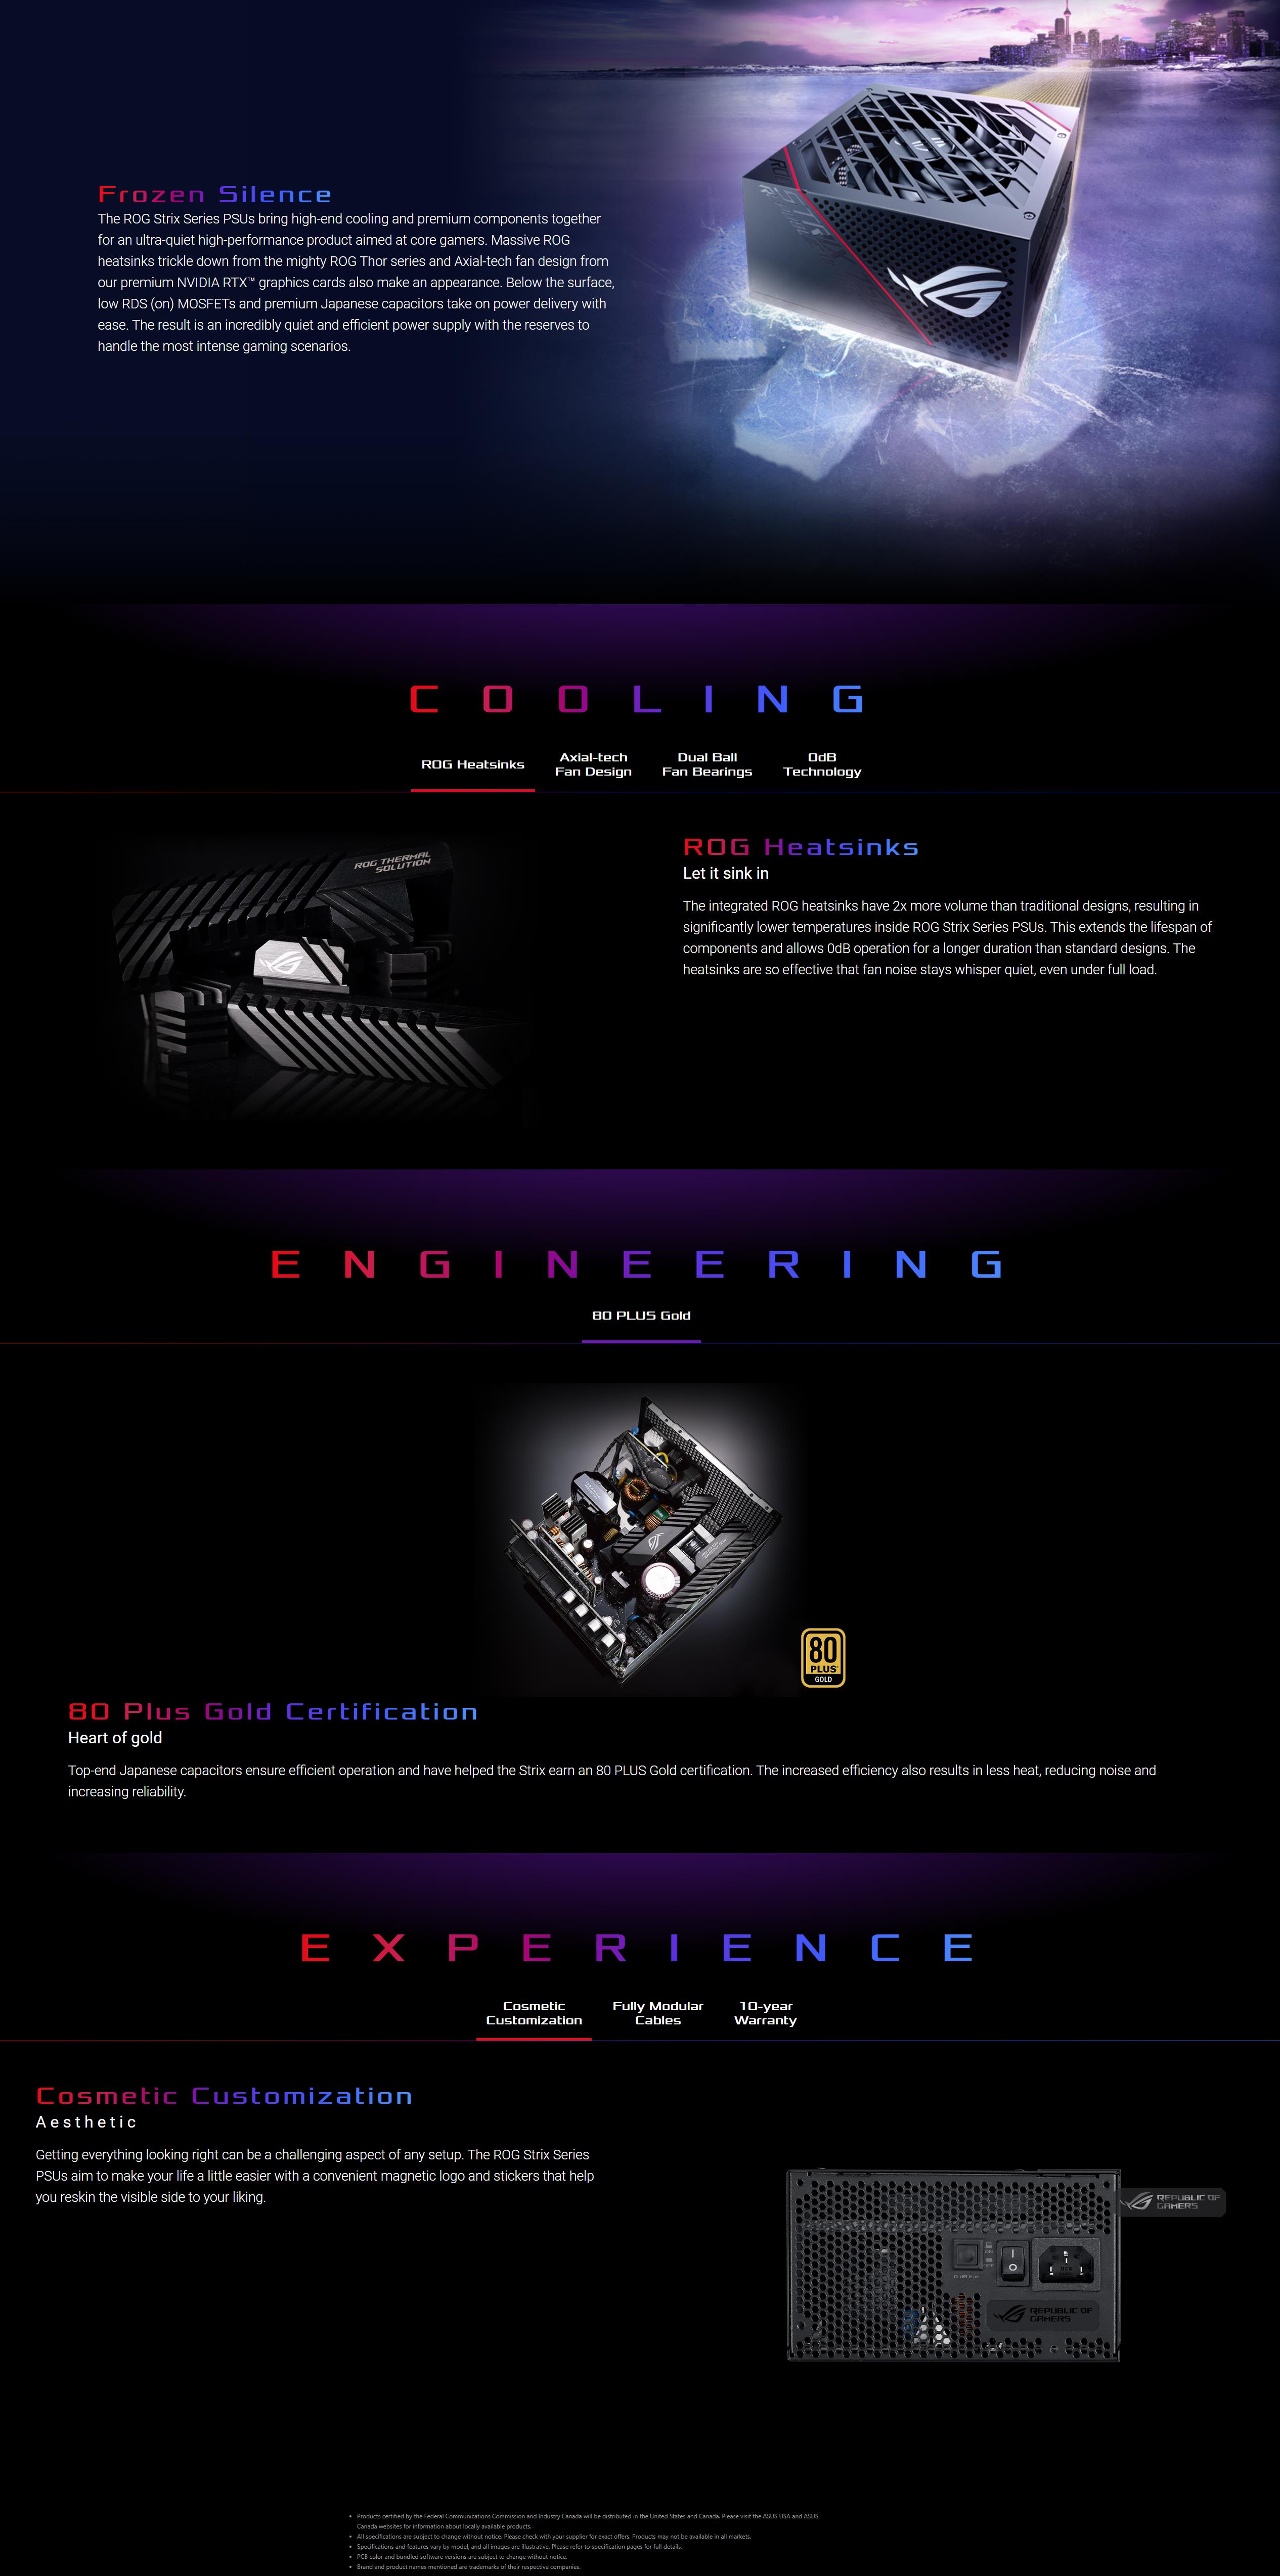 A large marketing image providing additional information about the product ASUS ROG Strix 850W 80PLUS Gold Modular Power Supply - Additional alt info not provided